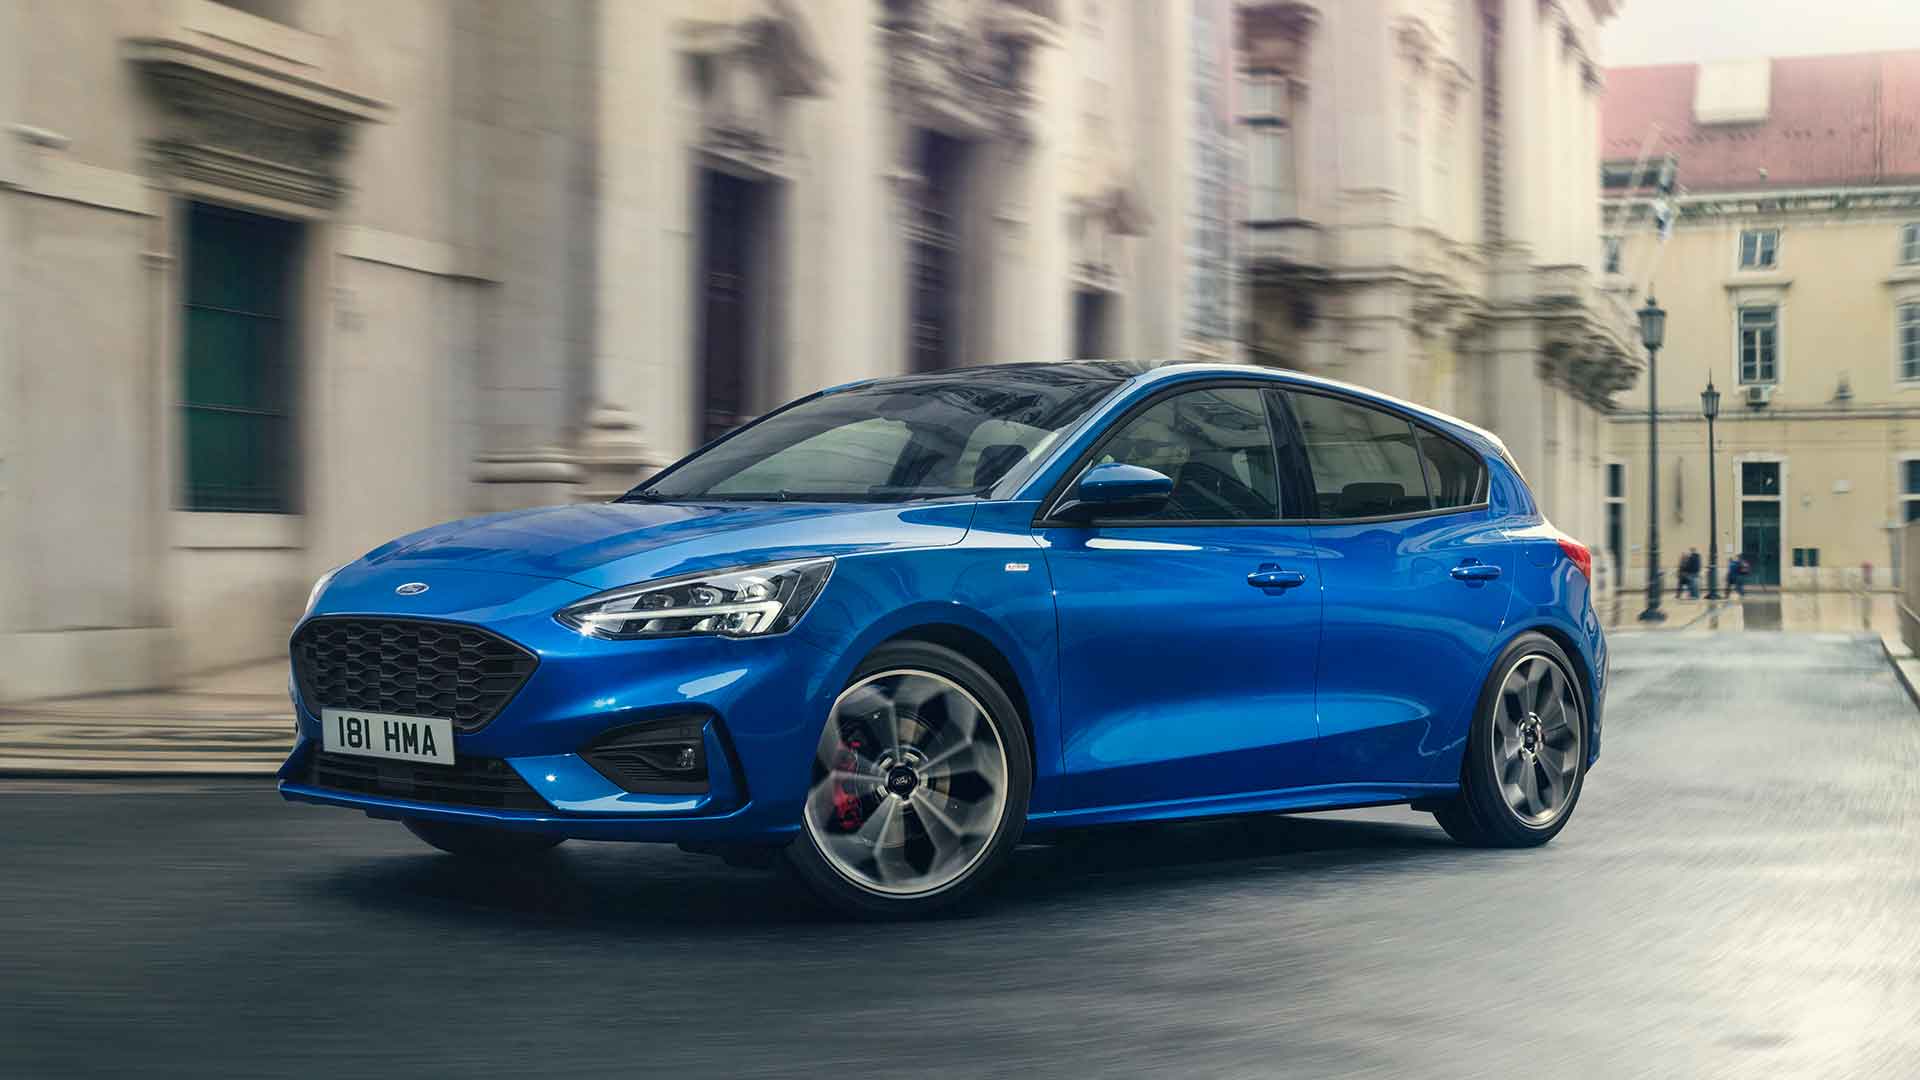 Experts pick the 10 safest new cars of 2019  Motoring Research